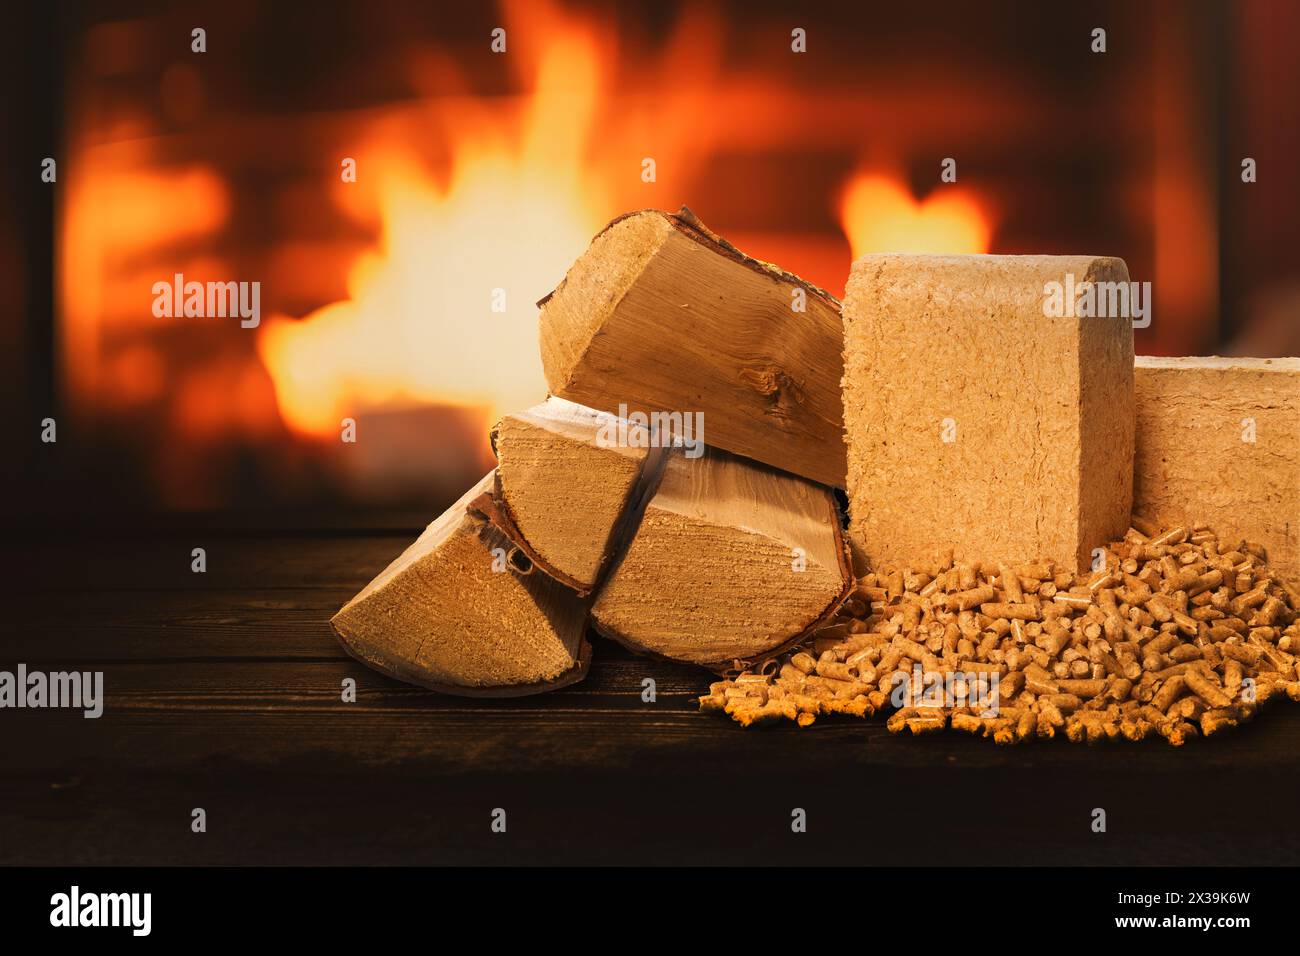 biomass heating. firewood, pellets and briquettes on wood burning fireplace background. sustainable, carbon neutral and renewable fuel Stock Photo